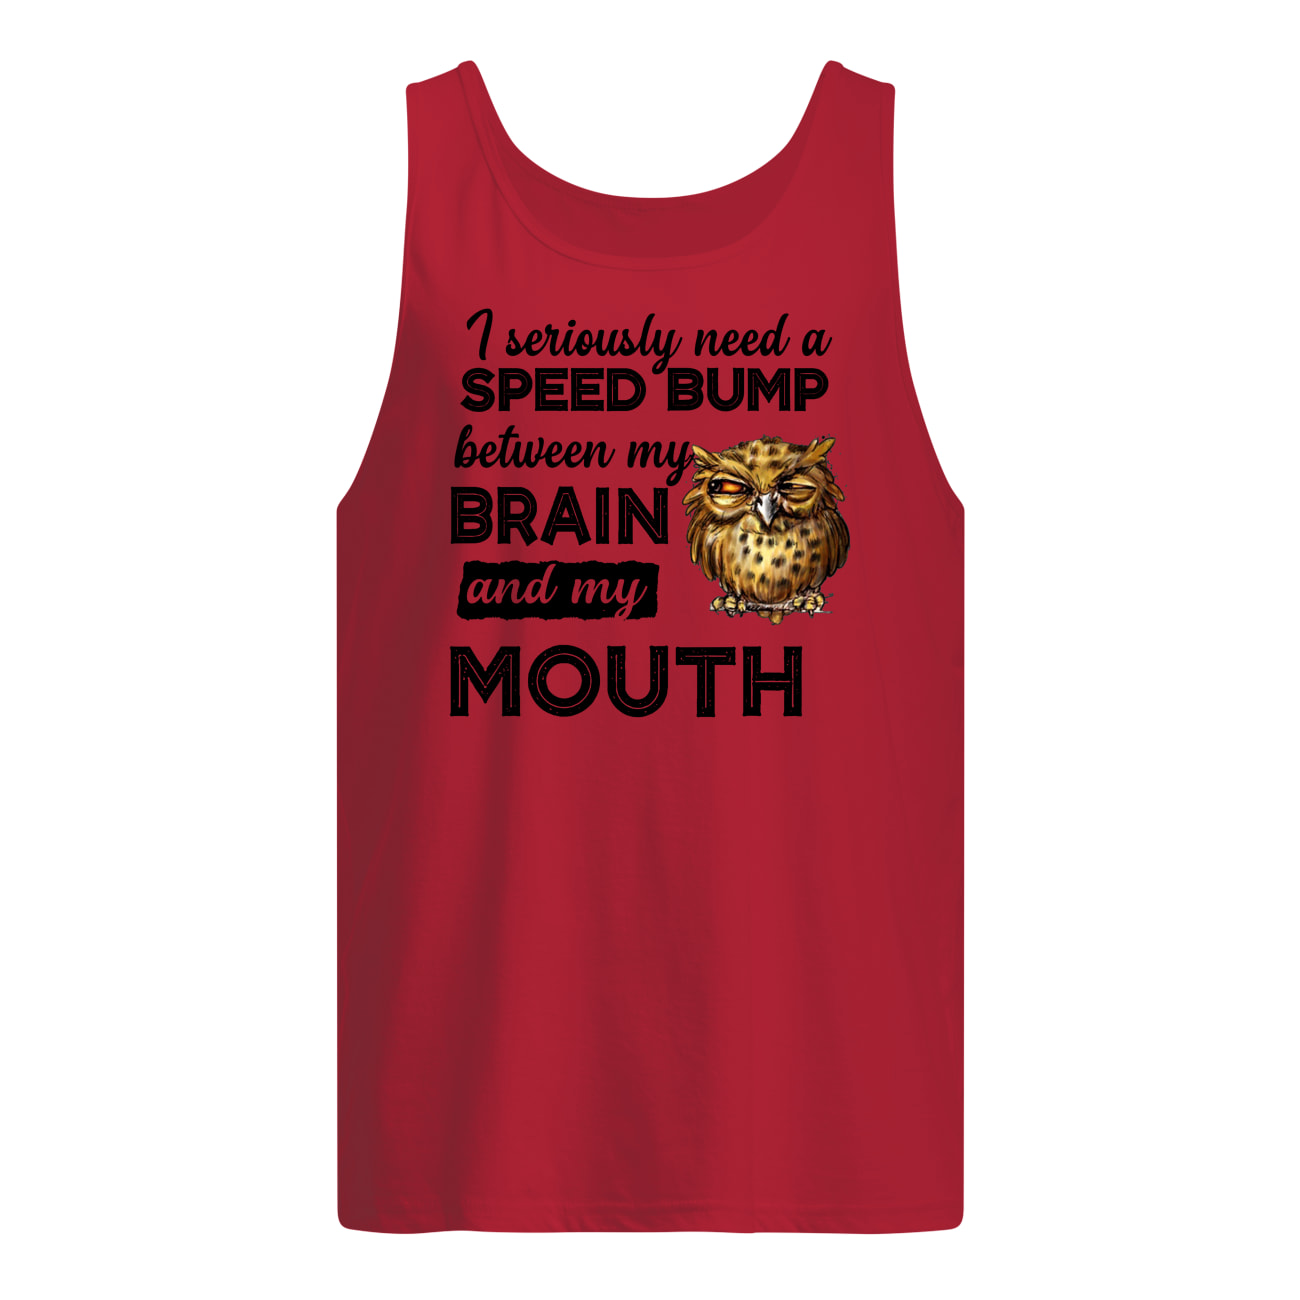 I seriously need a speed bump between my brain and my mouth owl tank top